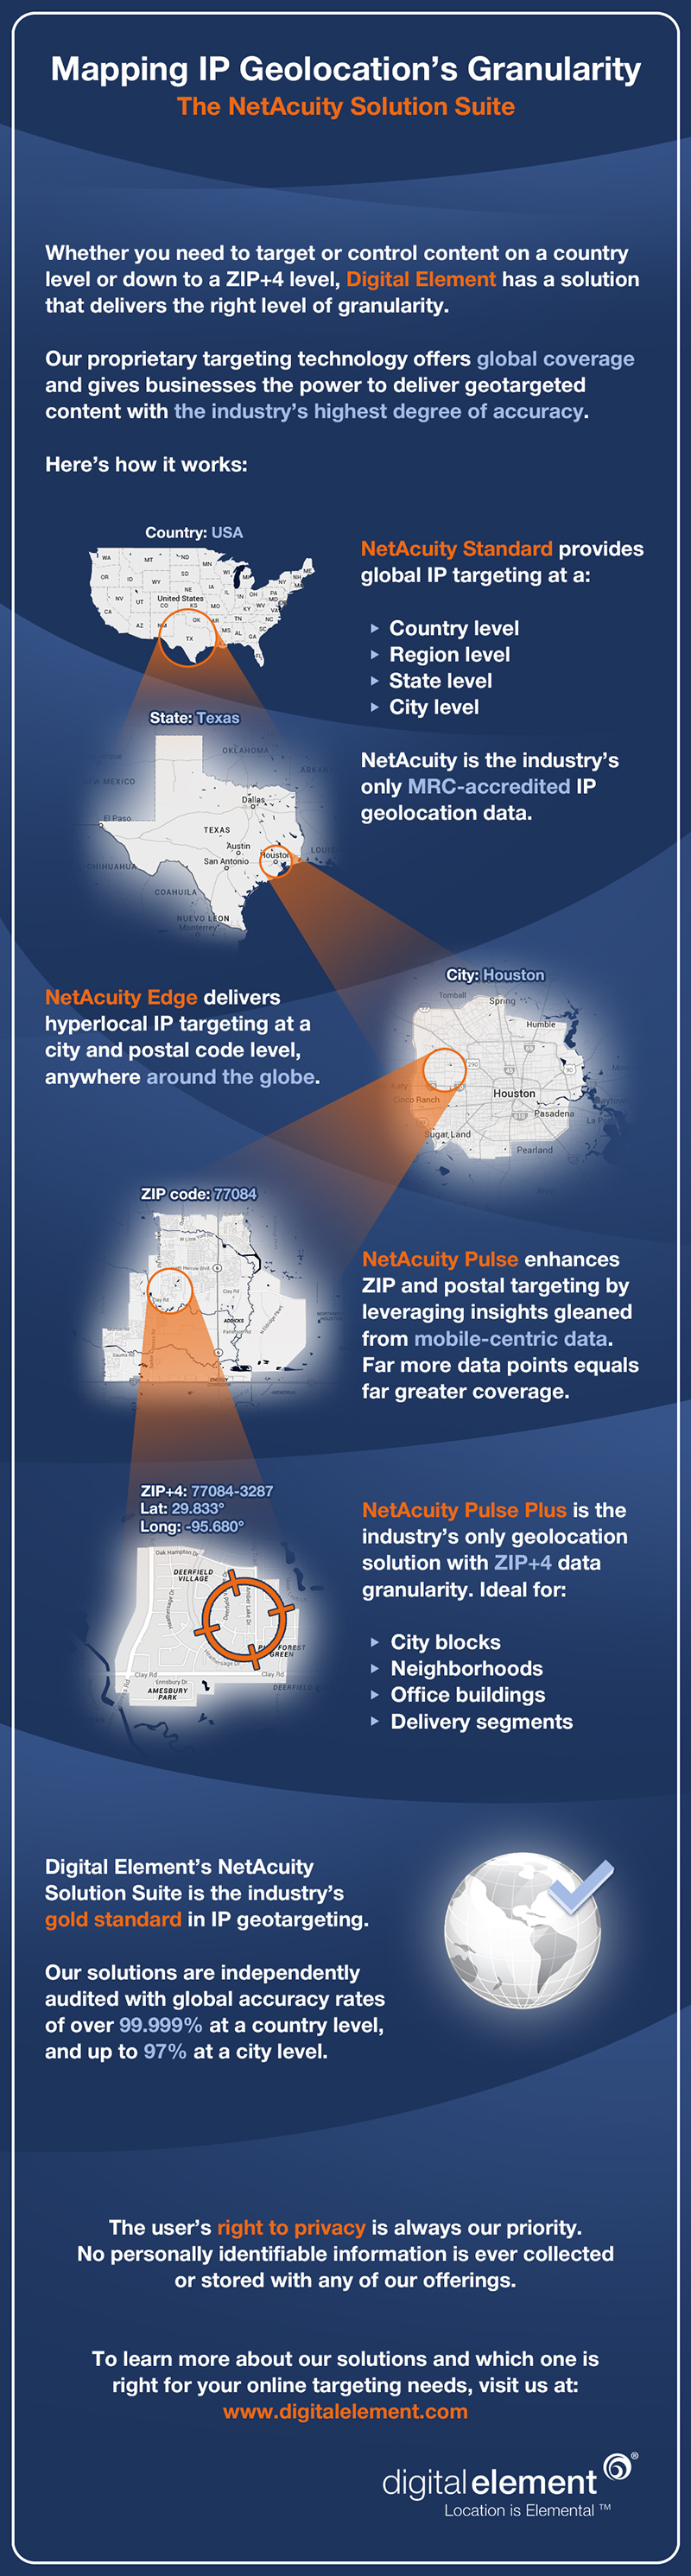 Infographic: The NetAcuity Solution Suite